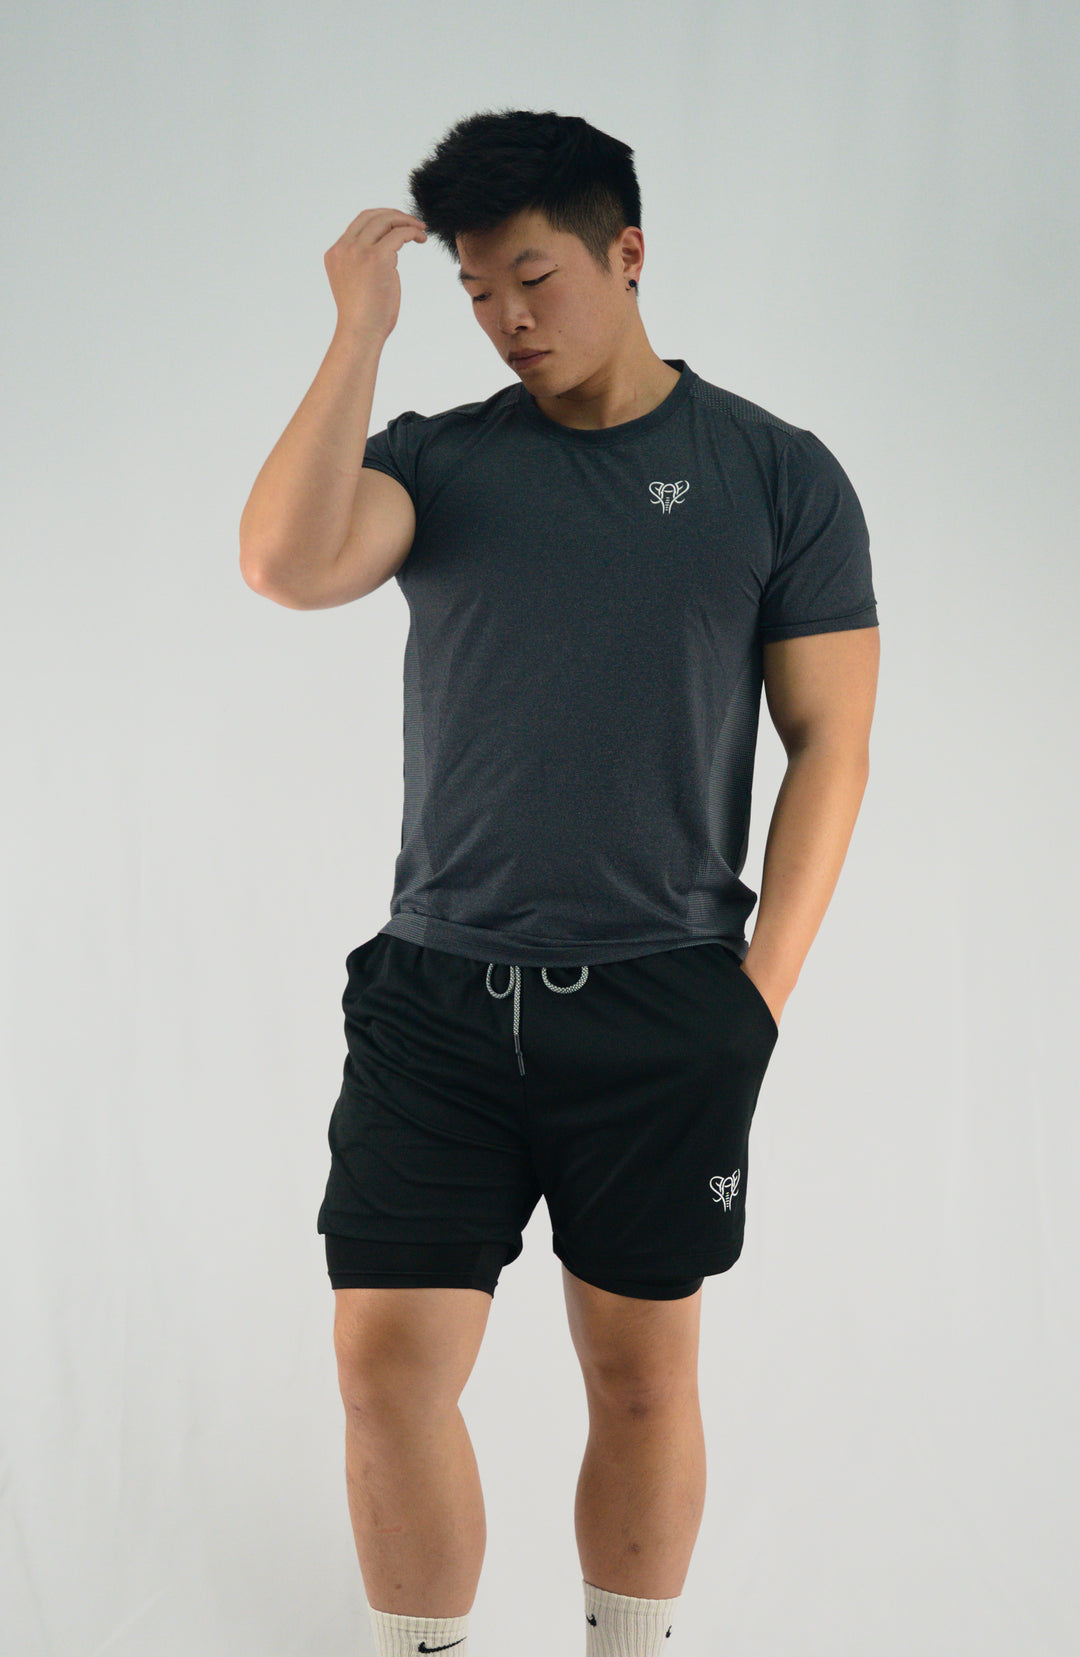 Black t-shirt for sports